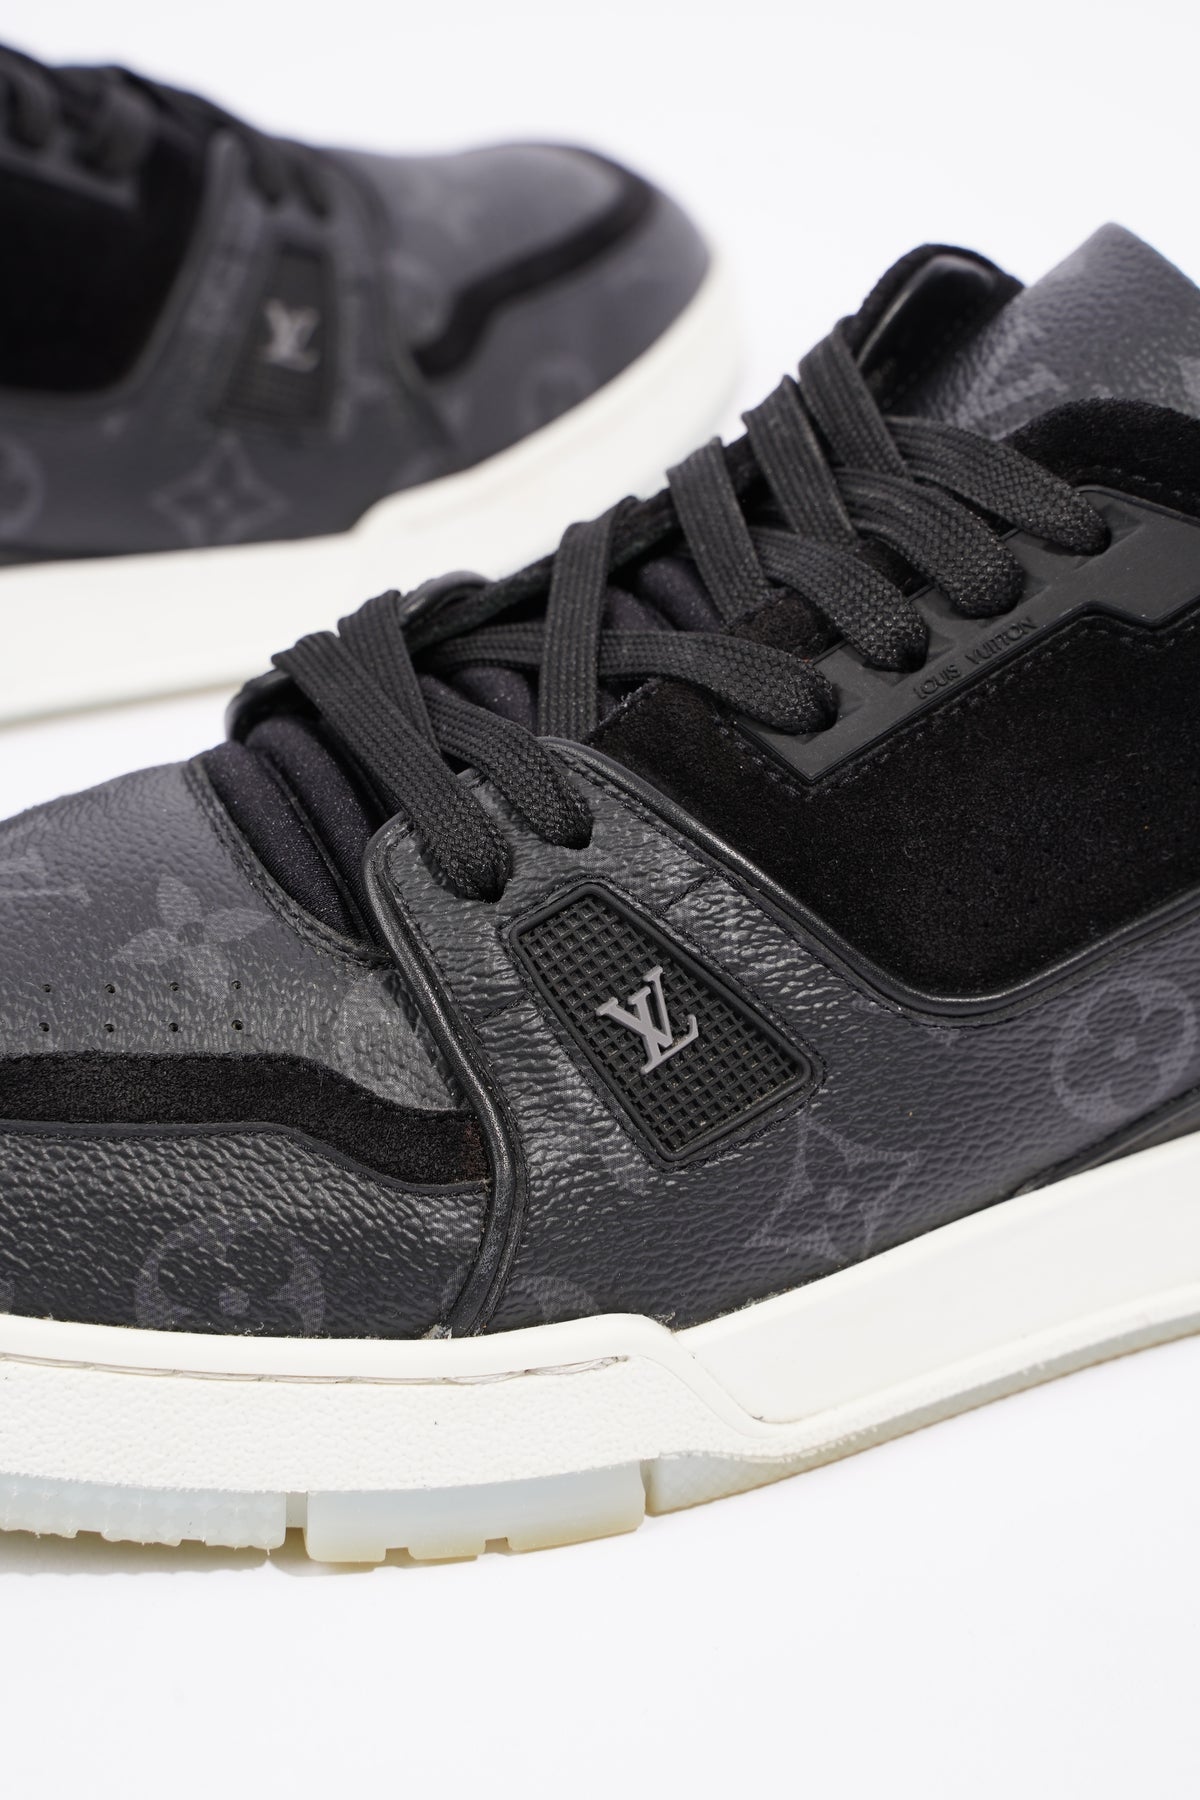 Lv trainer leather low trainers Louis Vuitton Black size 9 UK in